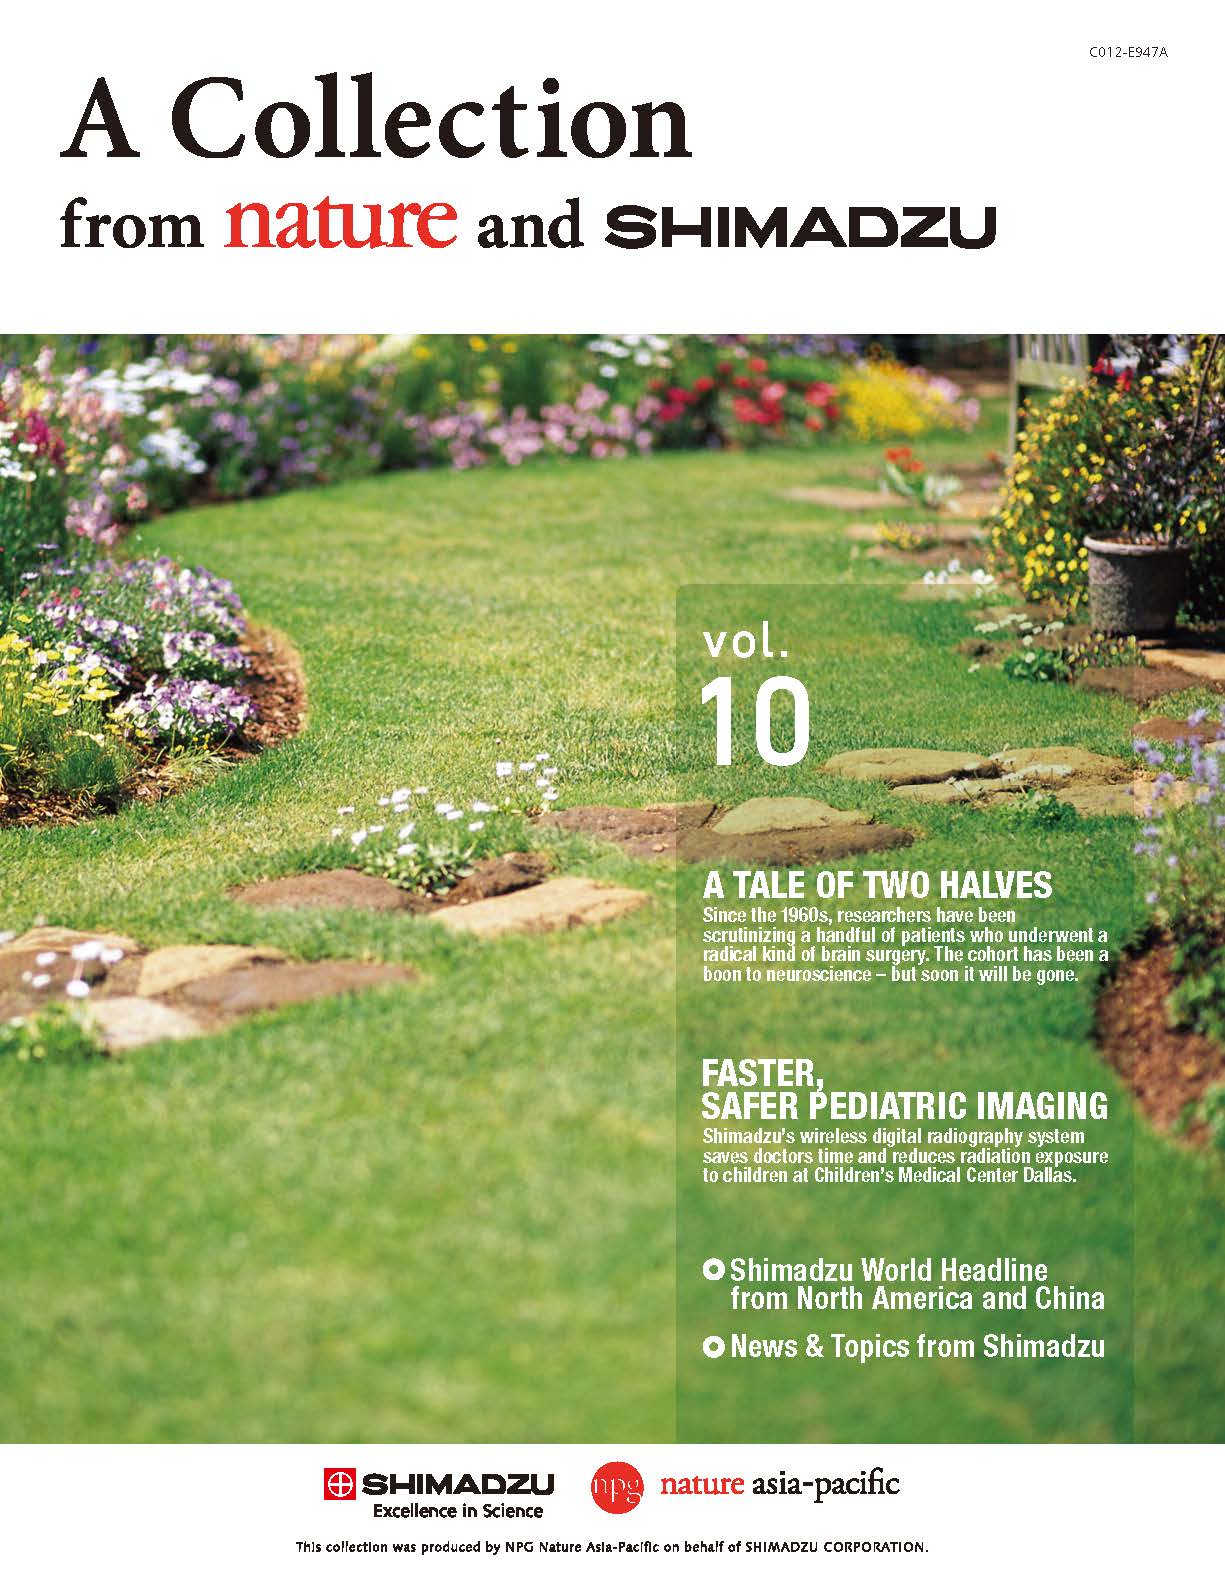 A Collection from nature and SHIMADZU